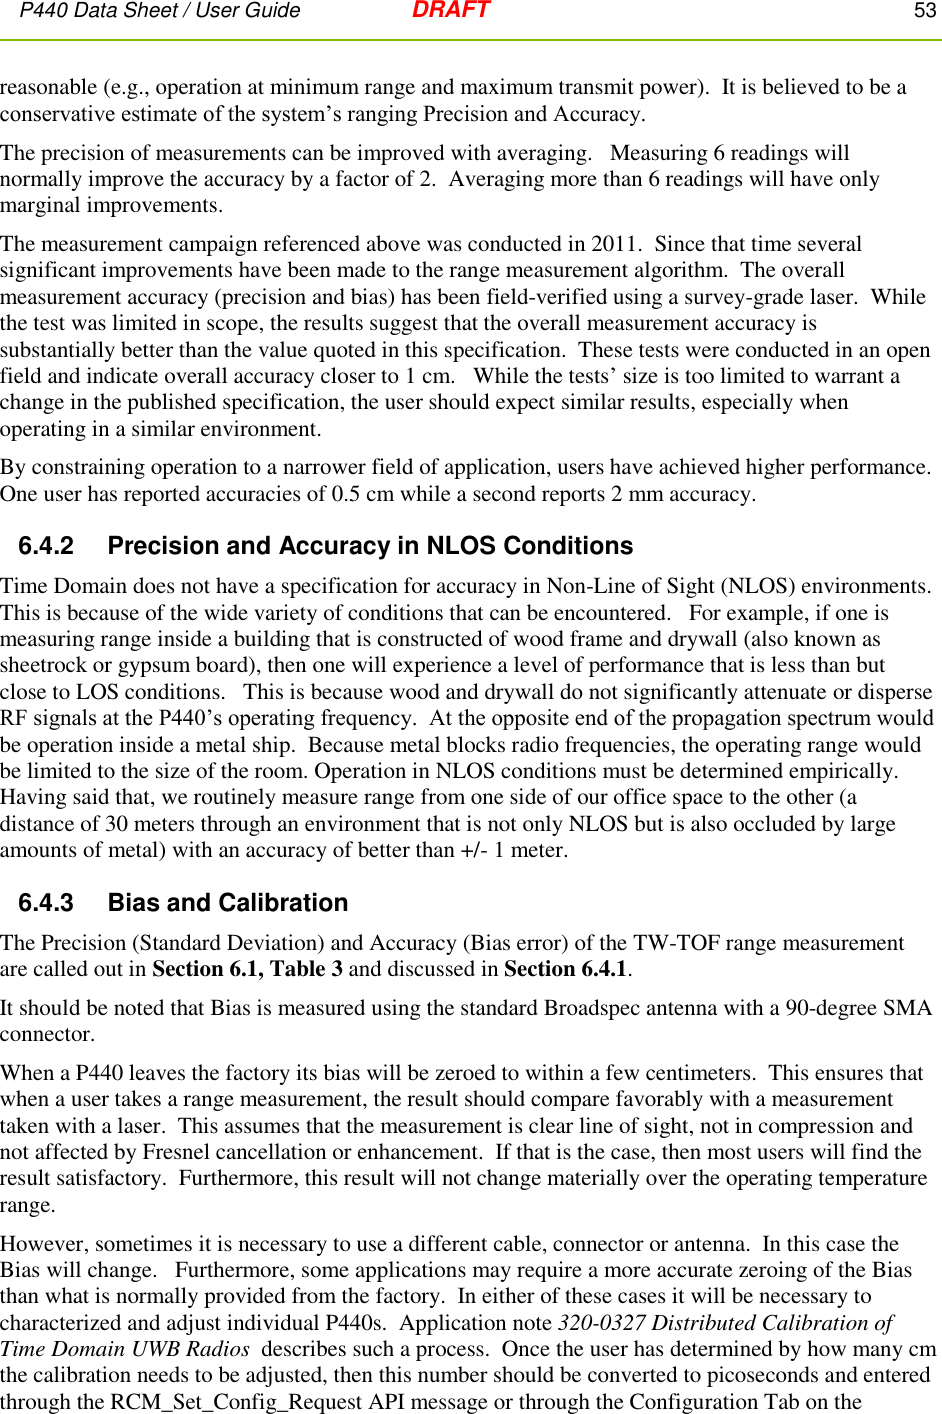 P440 Data Sheet / User Guide   DRAFT    53         reasonable (e.g., operation at minimum range and maximum transmit power).  It is believed to be a conservative estimate of the system’s ranging Precision and Accuracy.   The precision of measurements can be improved with averaging.   Measuring 6 readings will normally improve the accuracy by a factor of 2.  Averaging more than 6 readings will have only marginal improvements. The measurement campaign referenced above was conducted in 2011.  Since that time several significant improvements have been made to the range measurement algorithm.  The overall measurement accuracy (precision and bias) has been field-verified using a survey-grade laser.  While the test was limited in scope, the results suggest that the overall measurement accuracy is substantially better than the value quoted in this specification.  These tests were conducted in an open field and indicate overall accuracy closer to 1 cm.   While the tests’ size is too limited to warrant a change in the published specification, the user should expect similar results, especially when operating in a similar environment.   By constraining operation to a narrower field of application, users have achieved higher performance.  One user has reported accuracies of 0.5 cm while a second reports 2 mm accuracy.  6.4.2    Precision and Accuracy in NLOS Conditions Time Domain does not have a specification for accuracy in Non-Line of Sight (NLOS) environments.  This is because of the wide variety of conditions that can be encountered.   For example, if one is measuring range inside a building that is constructed of wood frame and drywall (also known as sheetrock or gypsum board), then one will experience a level of performance that is less than but close to LOS conditions.   This is because wood and drywall do not significantly attenuate or disperse RF signals at the P440’s operating frequency.  At the opposite end of the propagation spectrum would be operation inside a metal ship.  Because metal blocks radio frequencies, the operating range would be limited to the size of the room. Operation in NLOS conditions must be determined empirically.  Having said that, we routinely measure range from one side of our office space to the other (a distance of 30 meters through an environment that is not only NLOS but is also occluded by large amounts of metal) with an accuracy of better than +/- 1 meter. 6.4.3    Bias and Calibration The Precision (Standard Deviation) and Accuracy (Bias error) of the TW-TOF range measurement are called out in Section 6.1, Table 3 and discussed in Section 6.4.1.    It should be noted that Bias is measured using the standard Broadspec antenna with a 90-degree SMA connector.   When a P440 leaves the factory its bias will be zeroed to within a few centimeters.  This ensures that when a user takes a range measurement, the result should compare favorably with a measurement taken with a laser.  This assumes that the measurement is clear line of sight, not in compression and not affected by Fresnel cancellation or enhancement.  If that is the case, then most users will find the result satisfactory.  Furthermore, this result will not change materially over the operating temperature range.  However, sometimes it is necessary to use a different cable, connector or antenna.  In this case the Bias will change.   Furthermore, some applications may require a more accurate zeroing of the Bias than what is normally provided from the factory.  In either of these cases it will be necessary to characterized and adjust individual P440s.  Application note 320-0327 Distributed Calibration of Time Domain UWB Radios  describes such a process.  Once the user has determined by how many cm the calibration needs to be adjusted, then this number should be converted to picoseconds and entered through the RCM_Set_Config_Request API message or through the Configuration Tab on the 